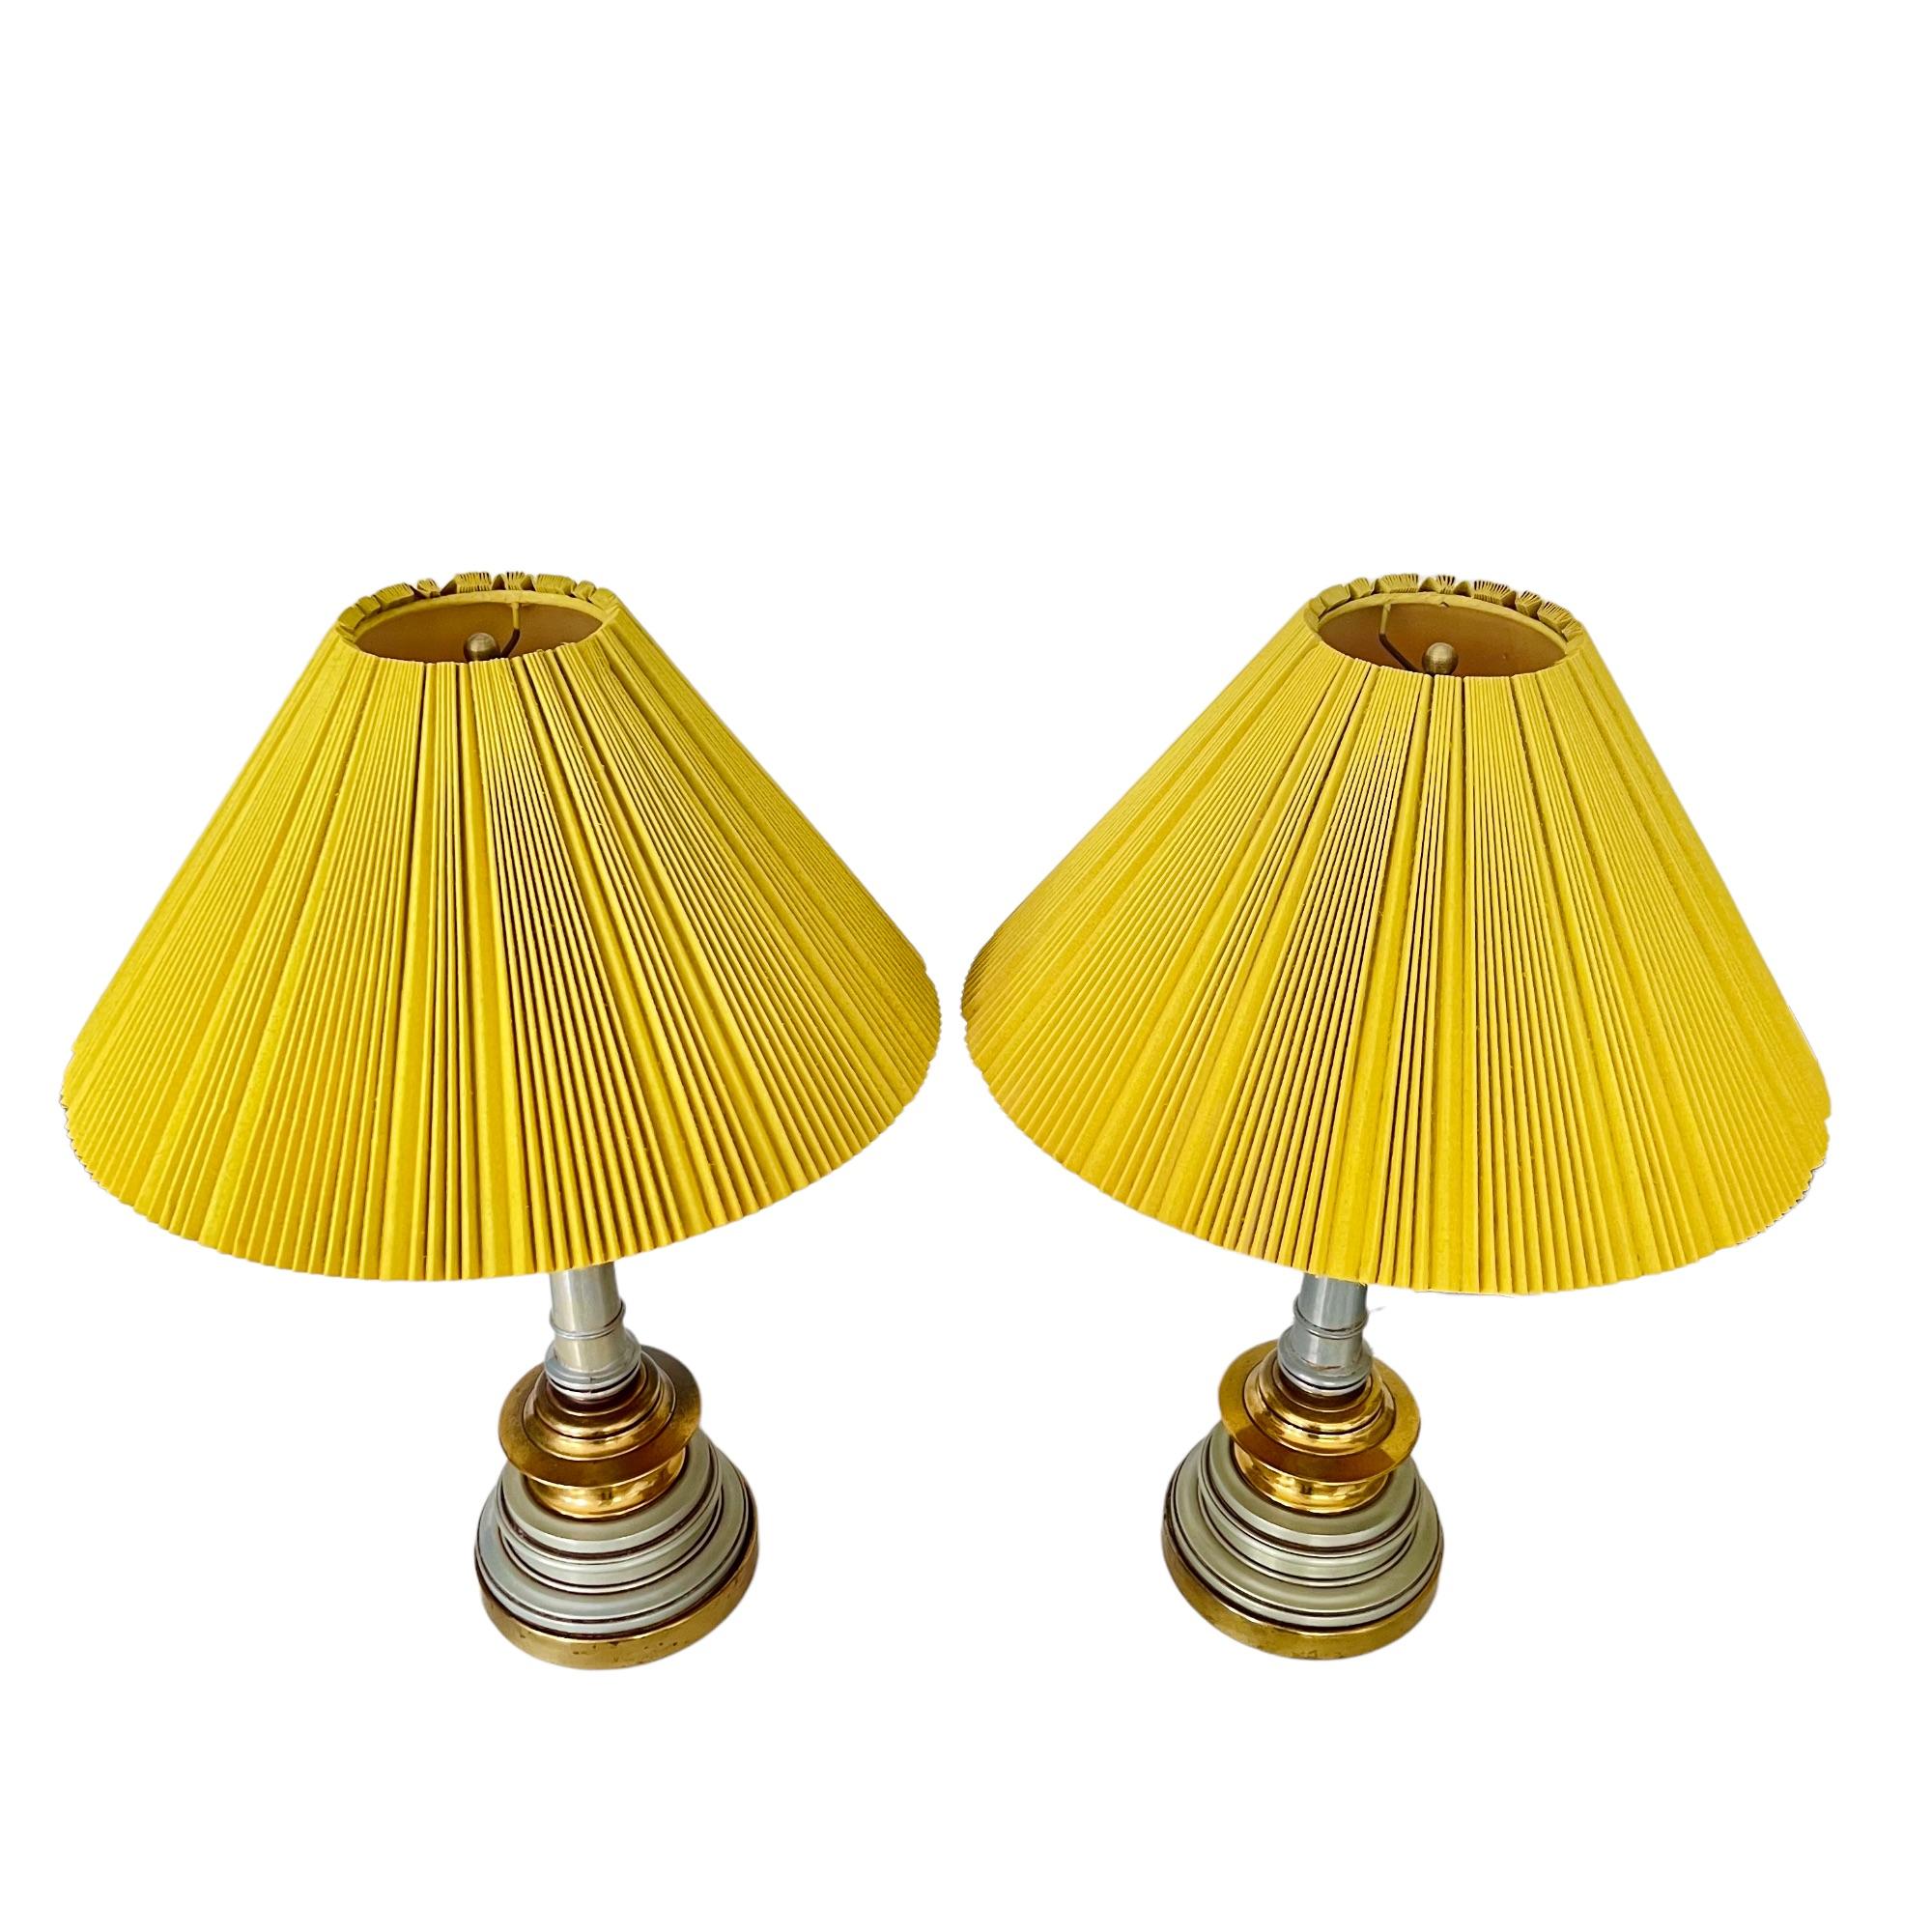 Enameled Hollywood Regency Enamel & Brass Lamps with Yellow Shades, a Pair